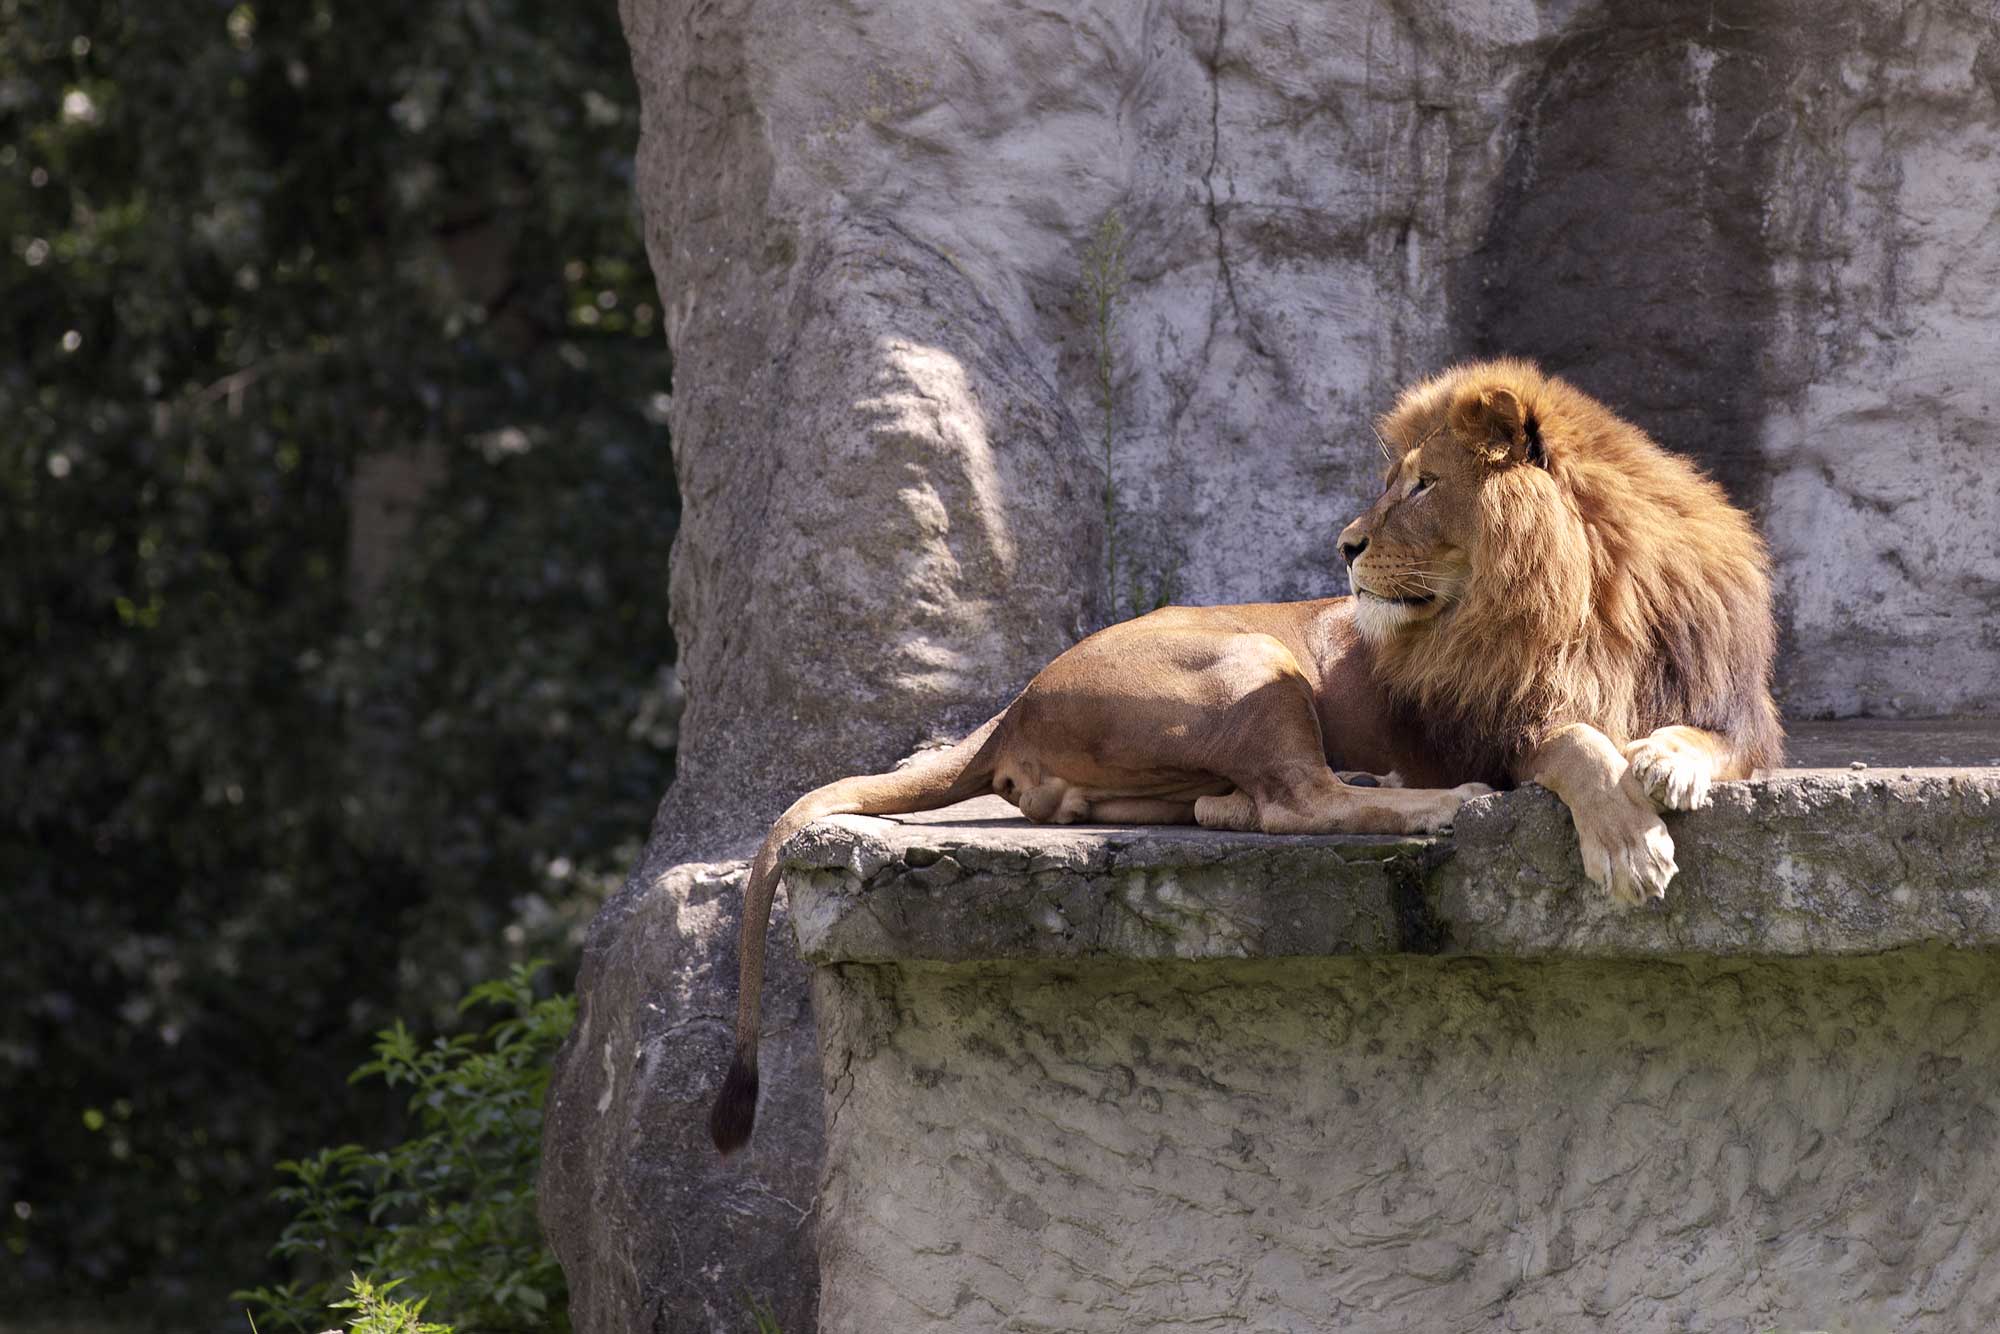 A lion at the Warsaw Zoo.